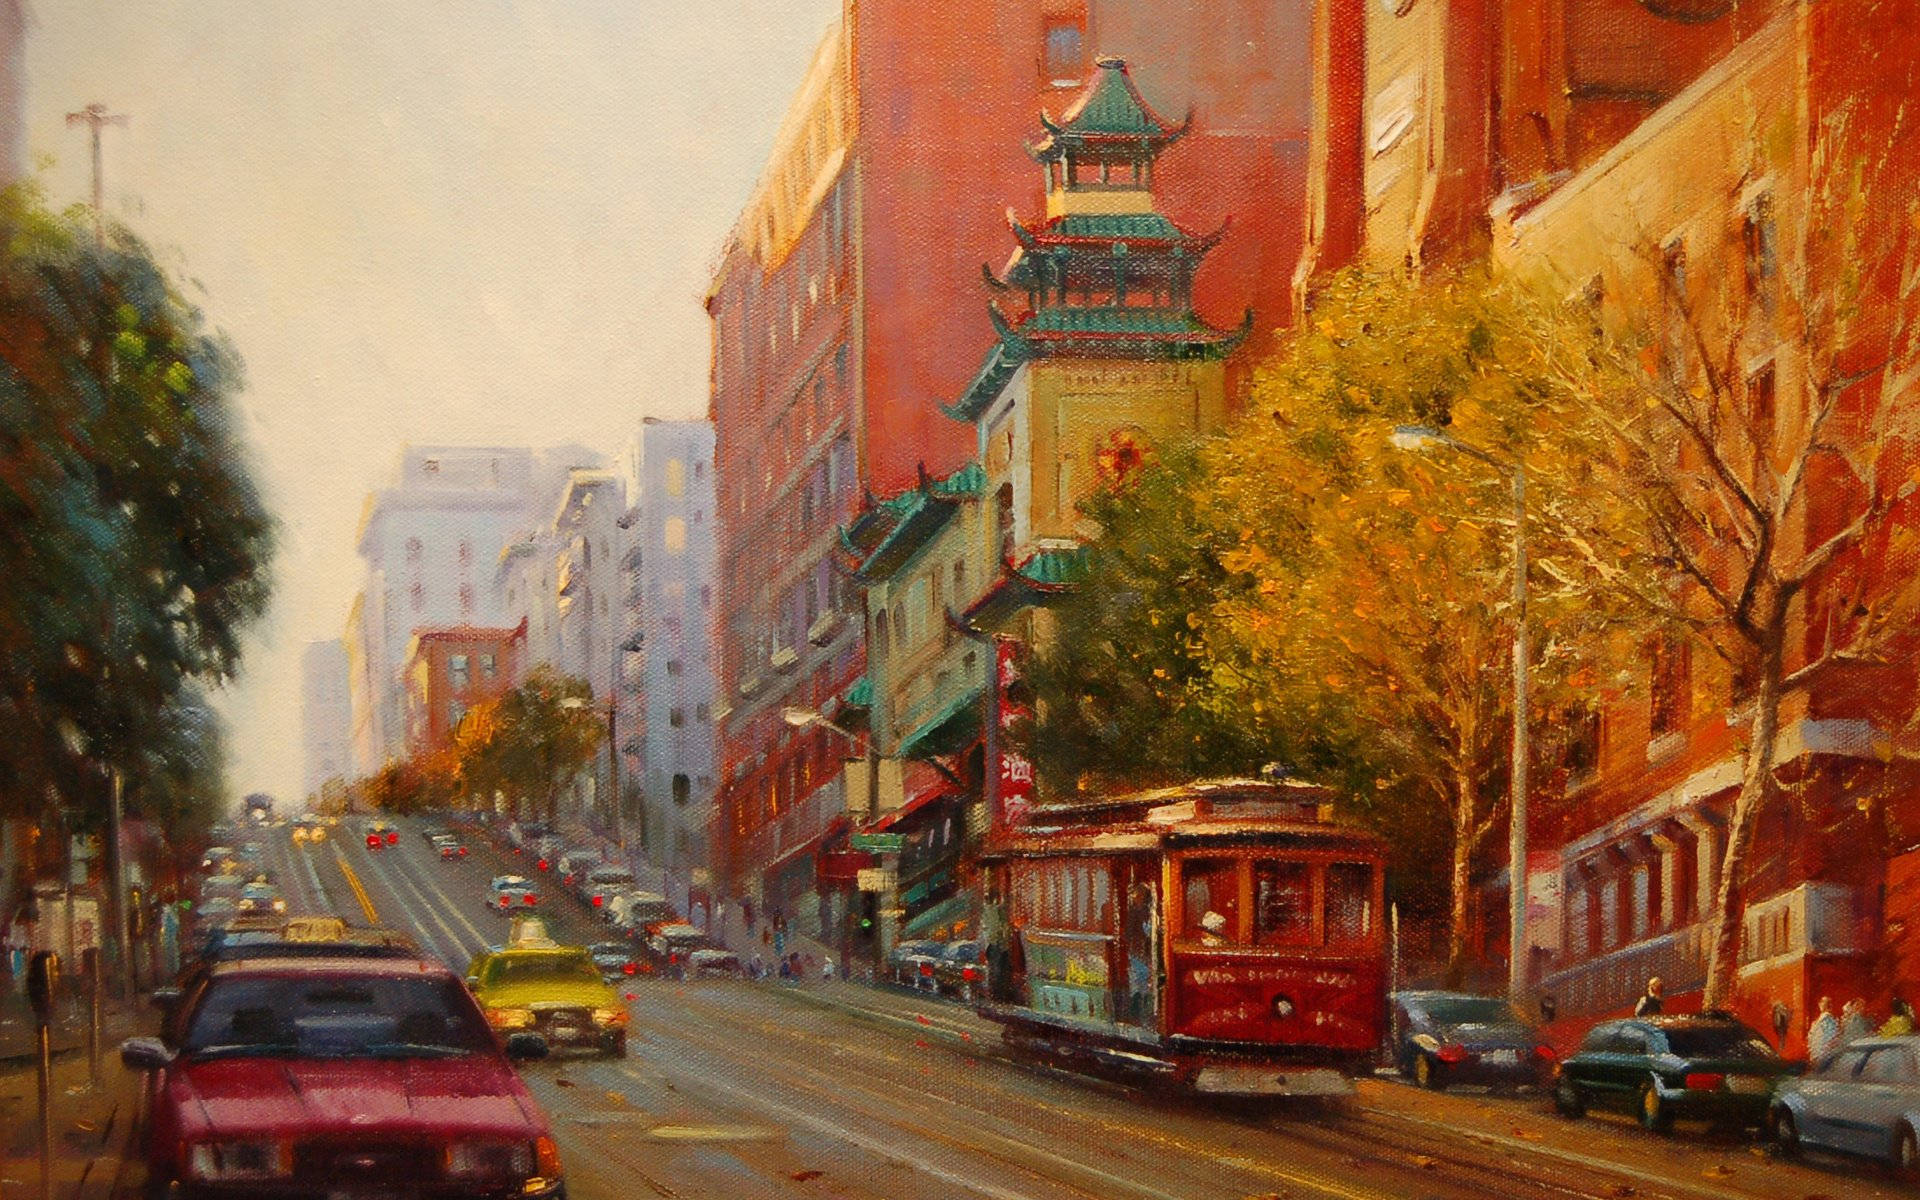 San Francisco City Road Painting Hd Picture